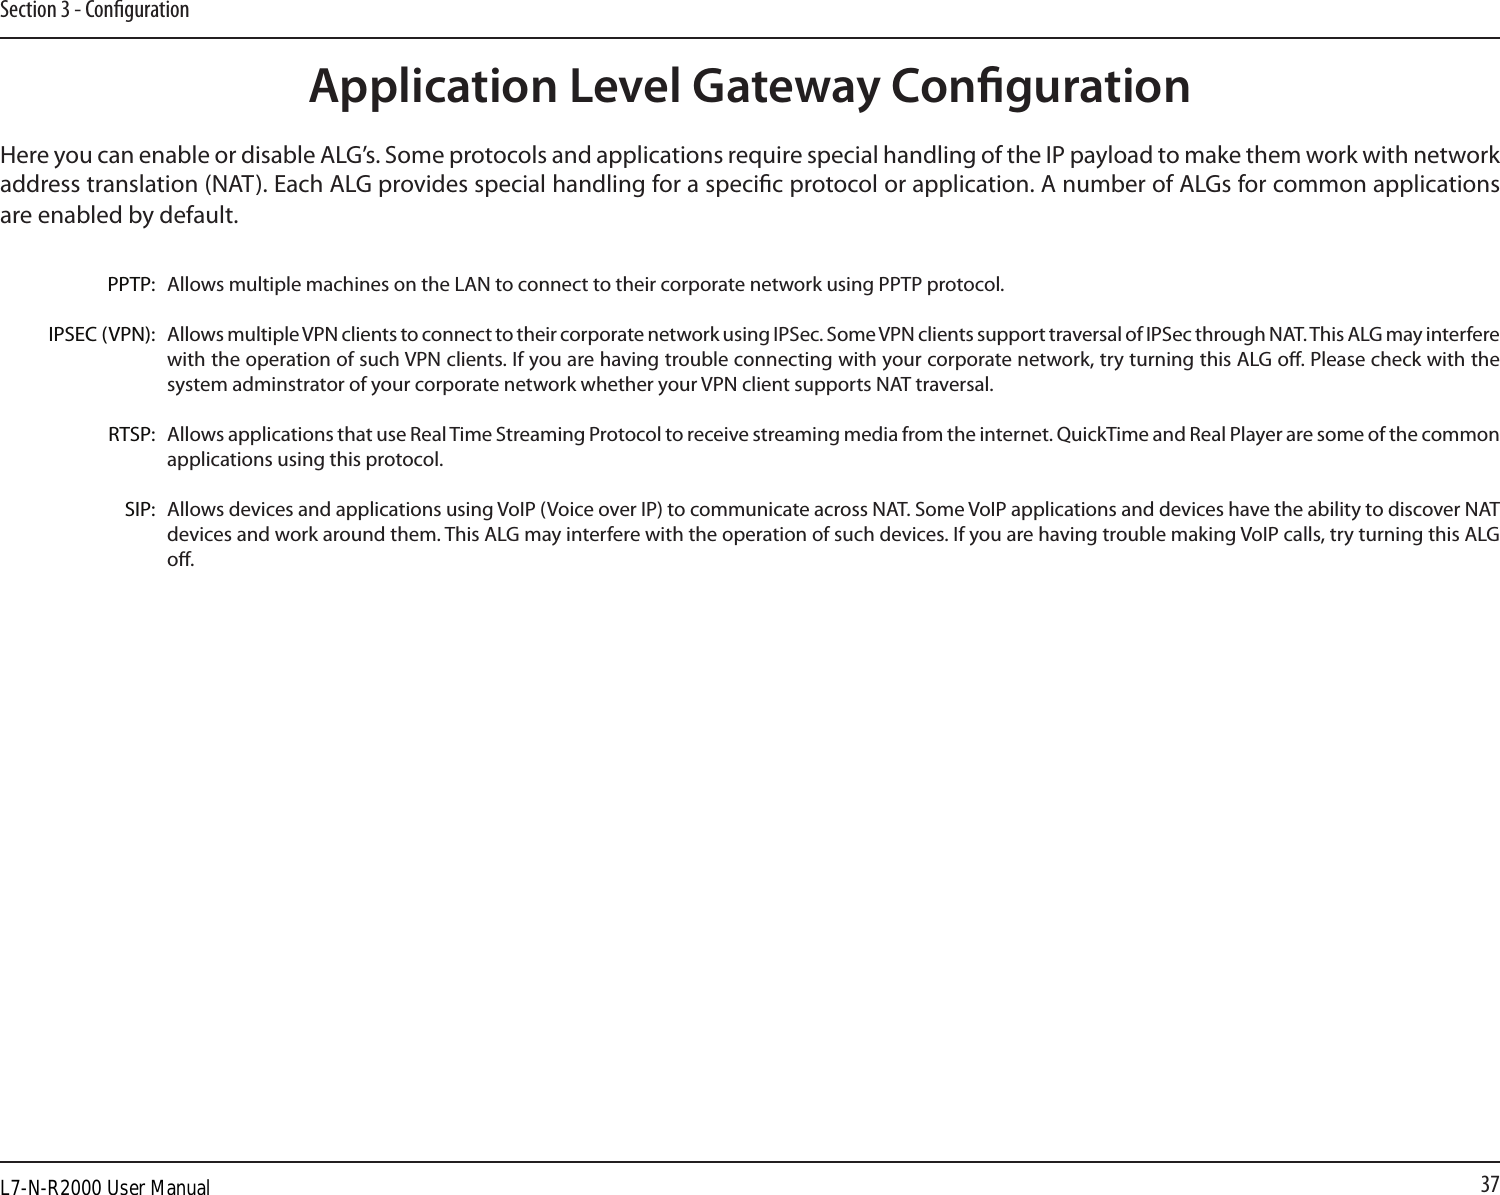 37Section 3 - CongurationApplication Level Gateway CongurationHere you can enable or disable ALG’s. Some protocols and applications require special handling of the IP payload to make them work with network address translation (NAT). Each ALG provides special handling for a specic protocol or application. A number of ALGs for common applications are enabled by default.Allows multiple machines on the LAN to connect to their corporate network using PPTP protocol. Allows multiple VPN clients to connect to their corporate network using IPSec. Some VPN clients support traversal of IPSec through NAT. This ALG may interfere with the operation of such VPN clients. If you are having trouble connecting with your corporate network, try turning this ALG o. Please check with the system adminstrator of your corporate network whether your VPN client supports NAT traversal.Allows applications that use Real Time Streaming Protocol to receive streaming media from the internet. QuickTime and Real Player are some of the common applications using this protocol. Allows devices and applications using VoIP (Voice over IP) to communicate across NAT. Some VoIP applications and devices have the ability to discover NAT devices and work around them. This ALG may interfere with the operation of such devices. If you are having trouble making VoIP calls, try turning this ALG o. PPTP:IPSEC (VPN):RTSP:SIP:L7-N-R2000 User Manual